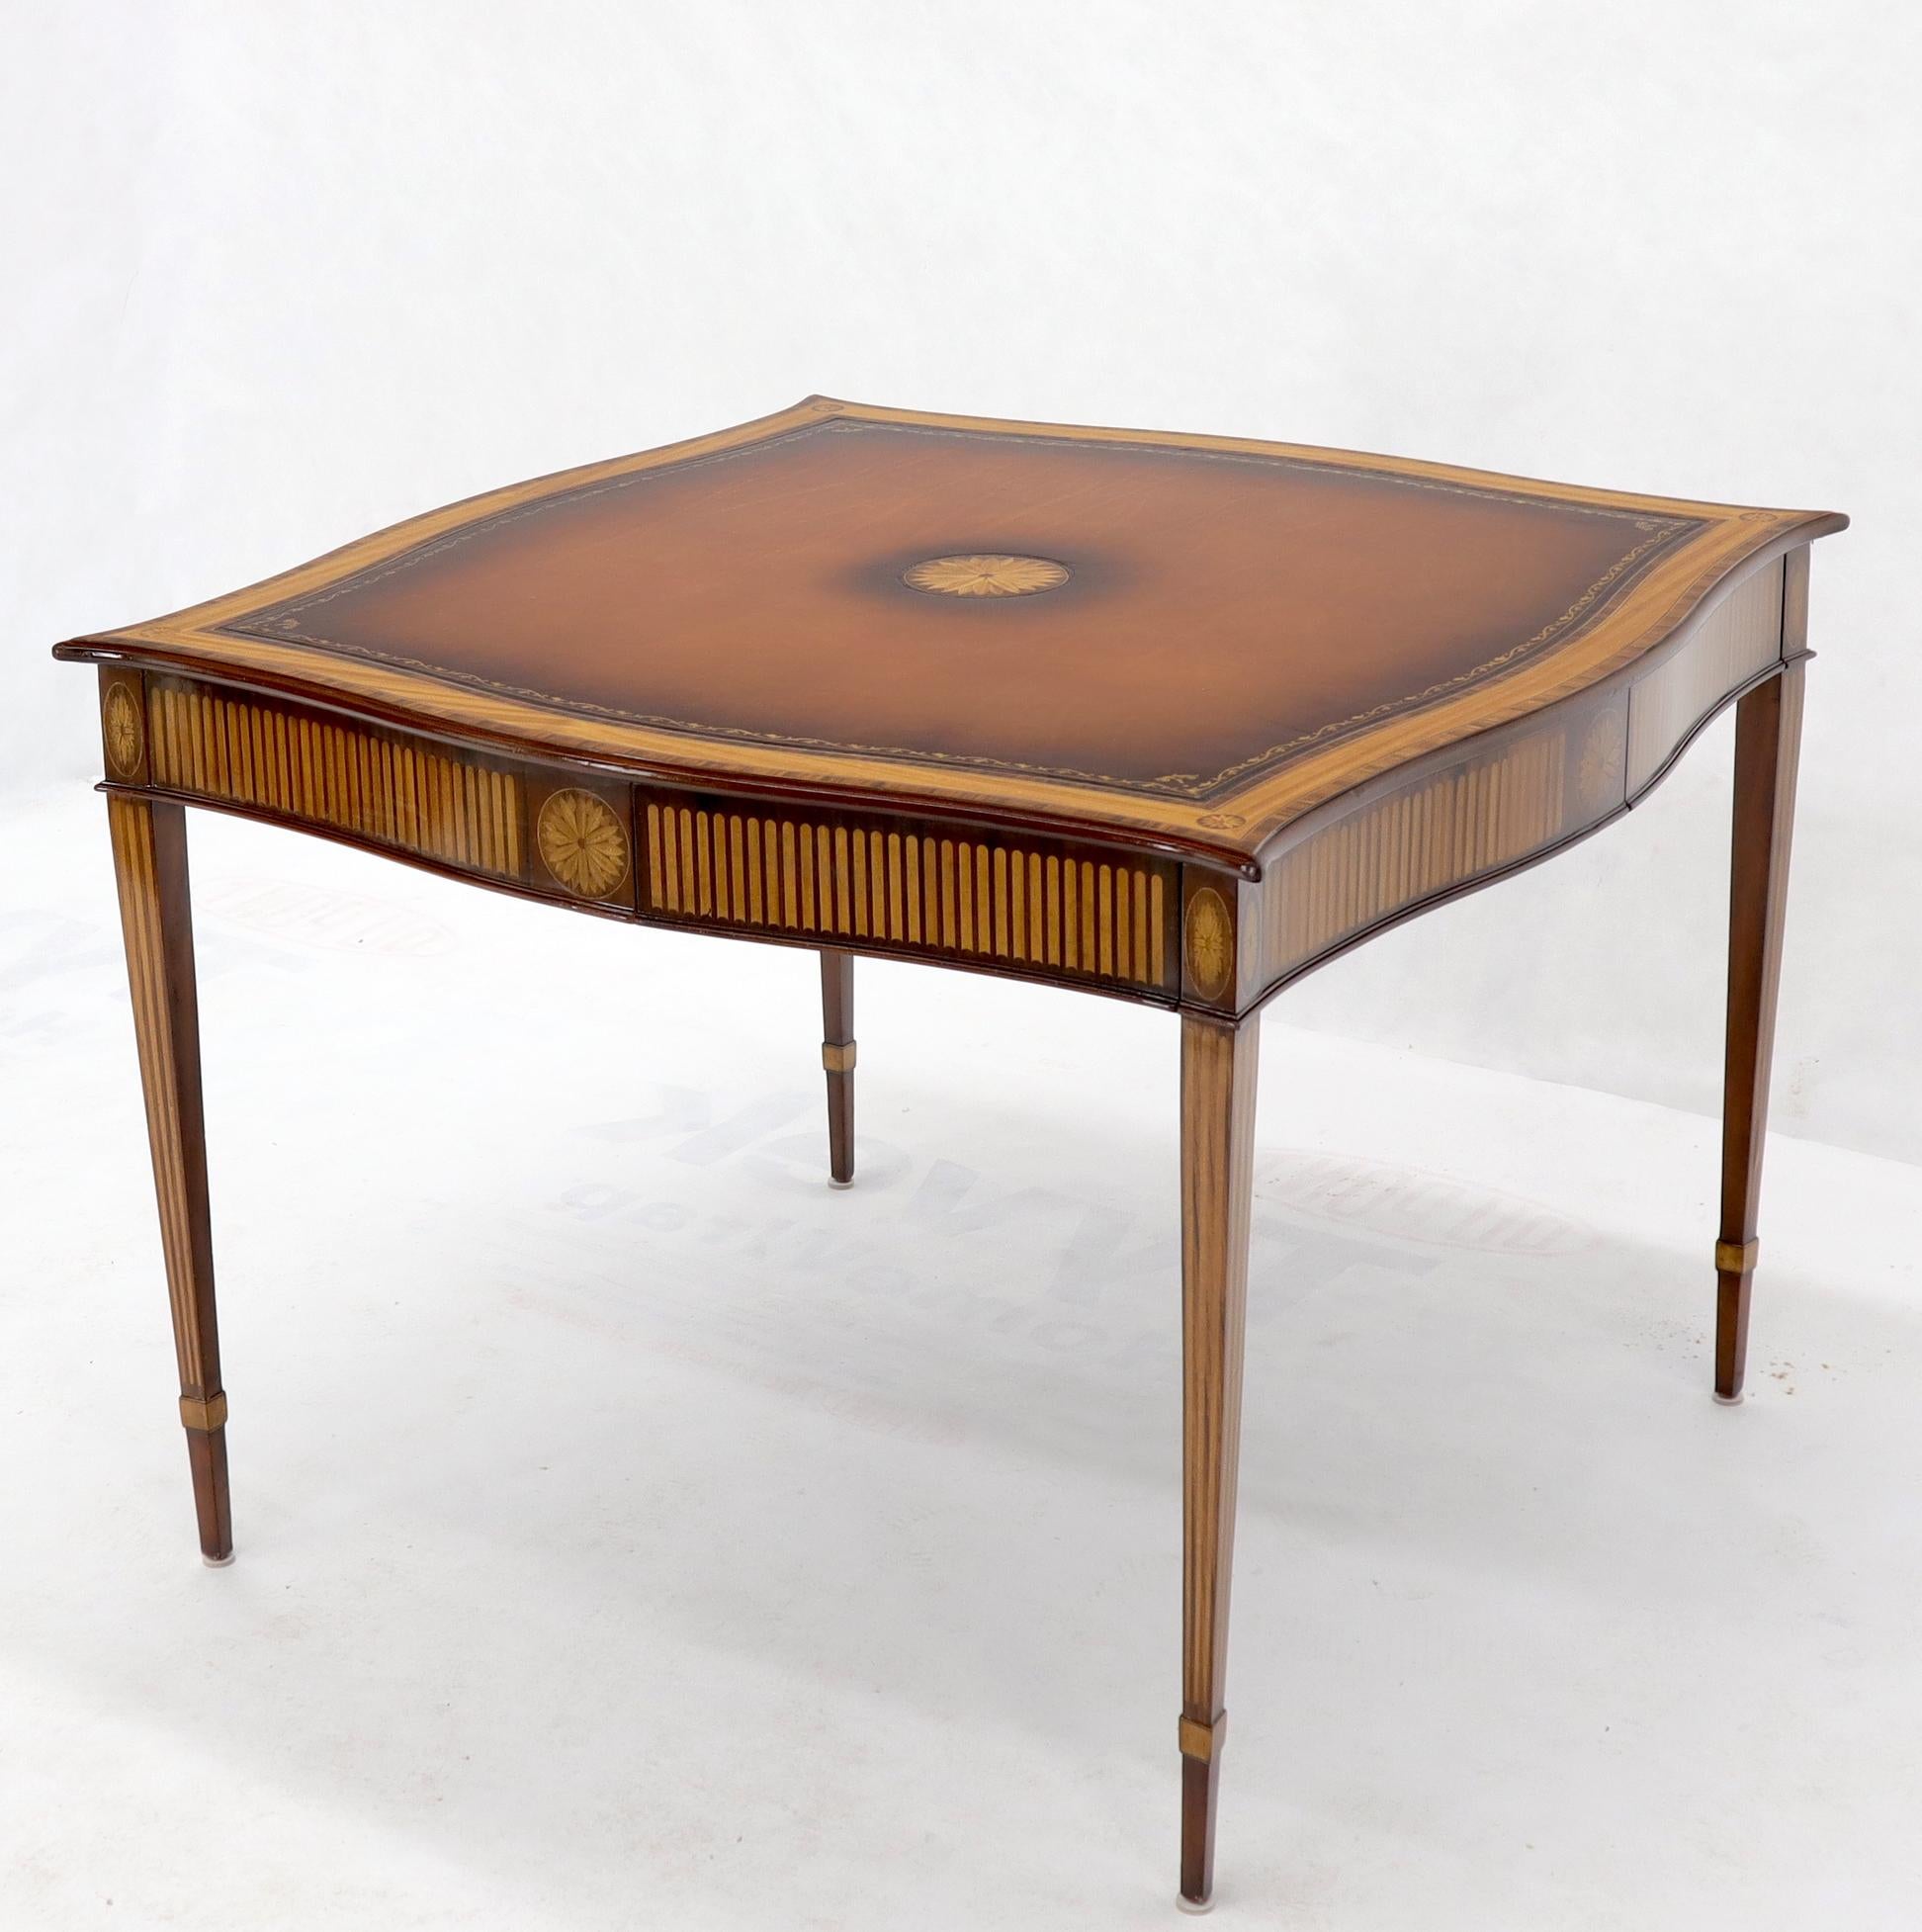 Mahogany and leather top inlay game writing table desk with tapered legs and 4 drawers.